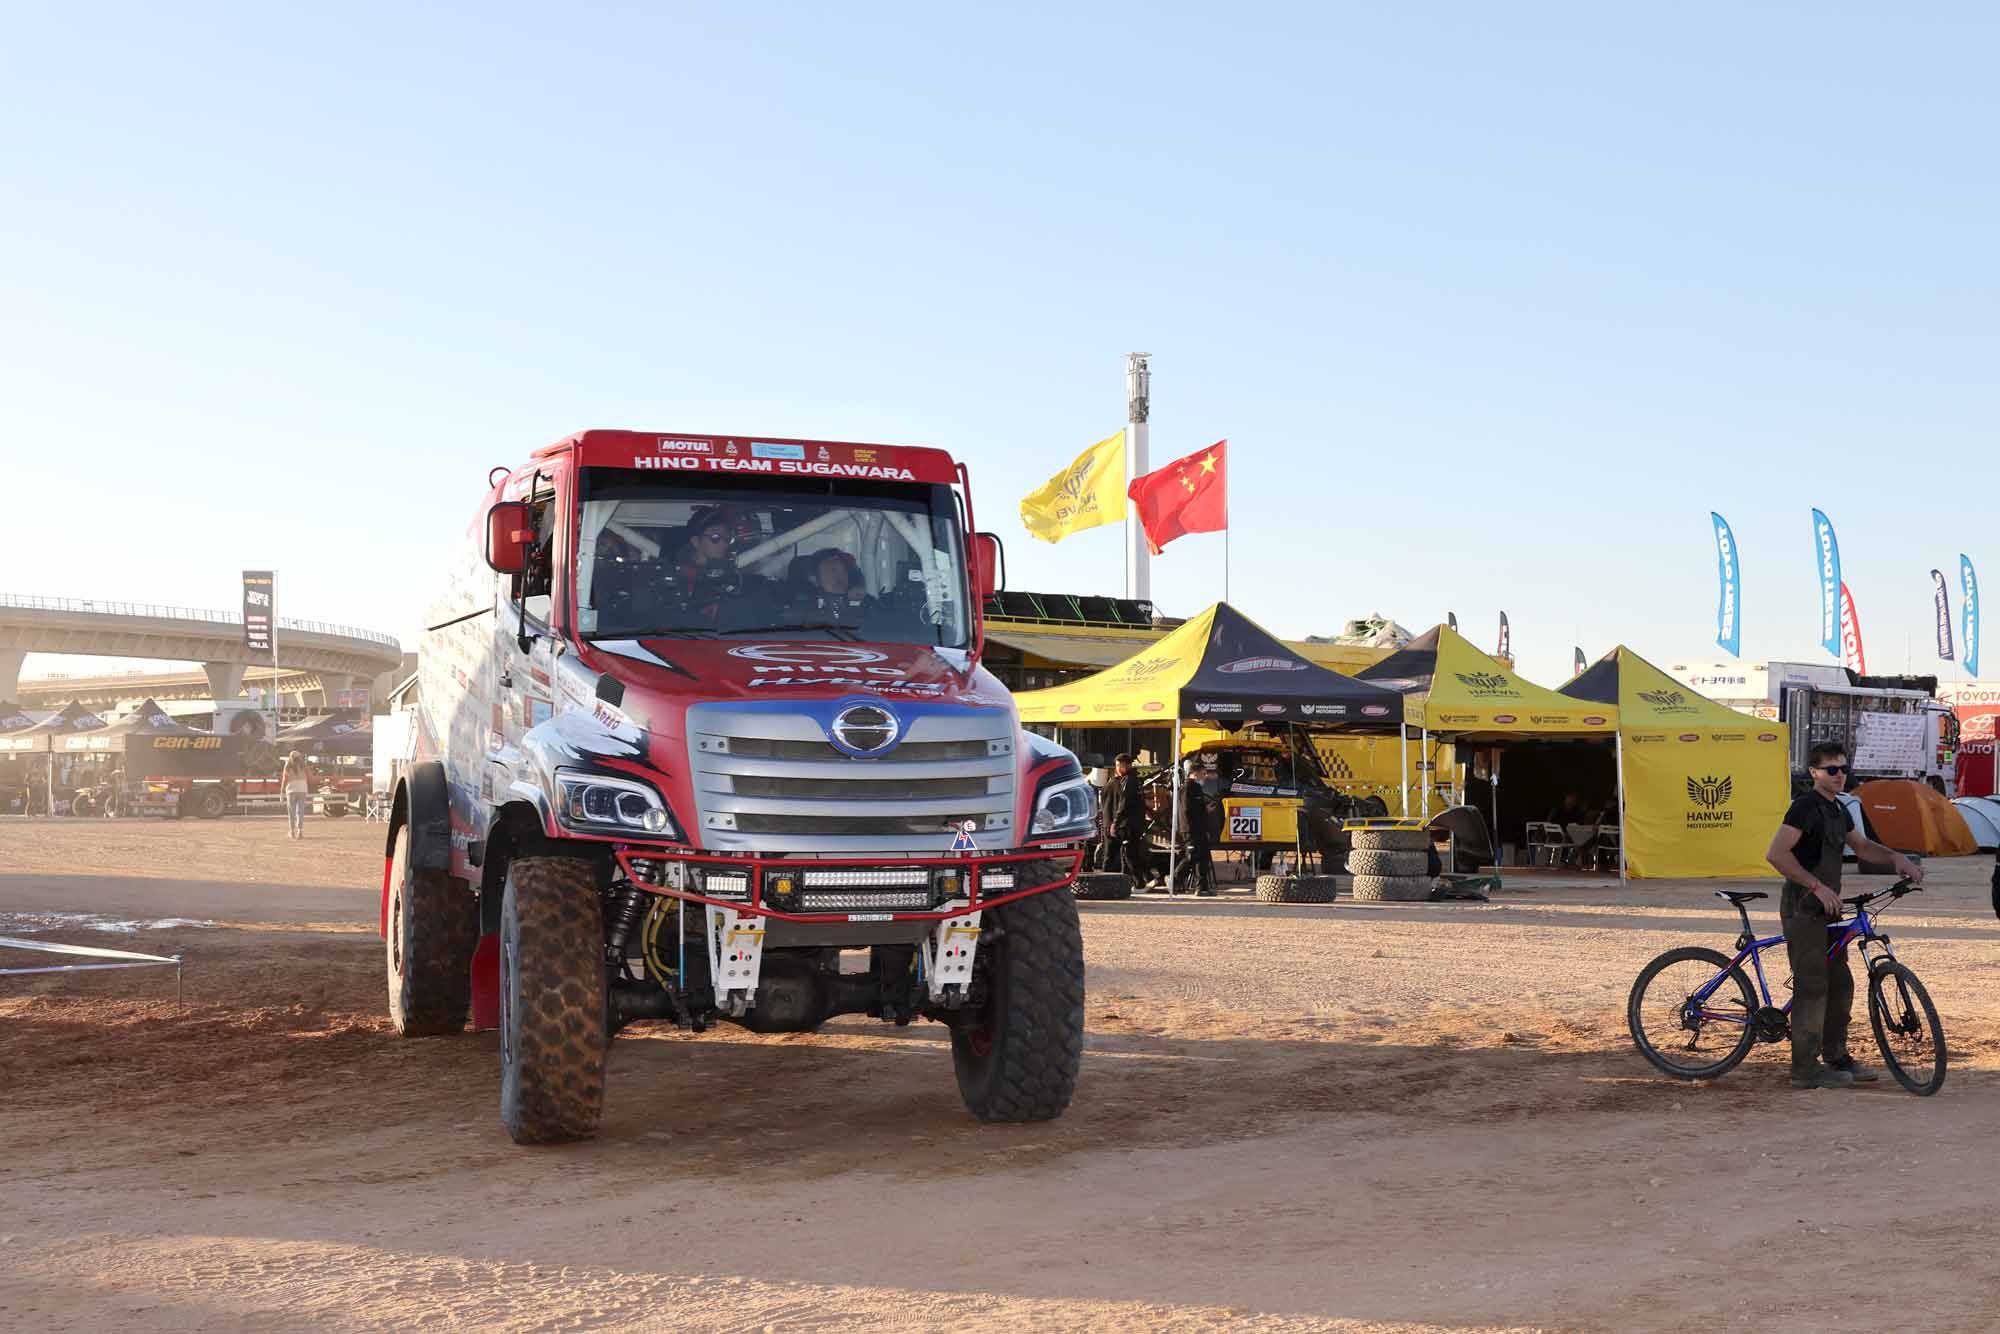 Stage5:Maintaining a good pace and finishing SS in 12th place. Increased the cumulative ranking by one and moved up to 19th place overall in the truck category.